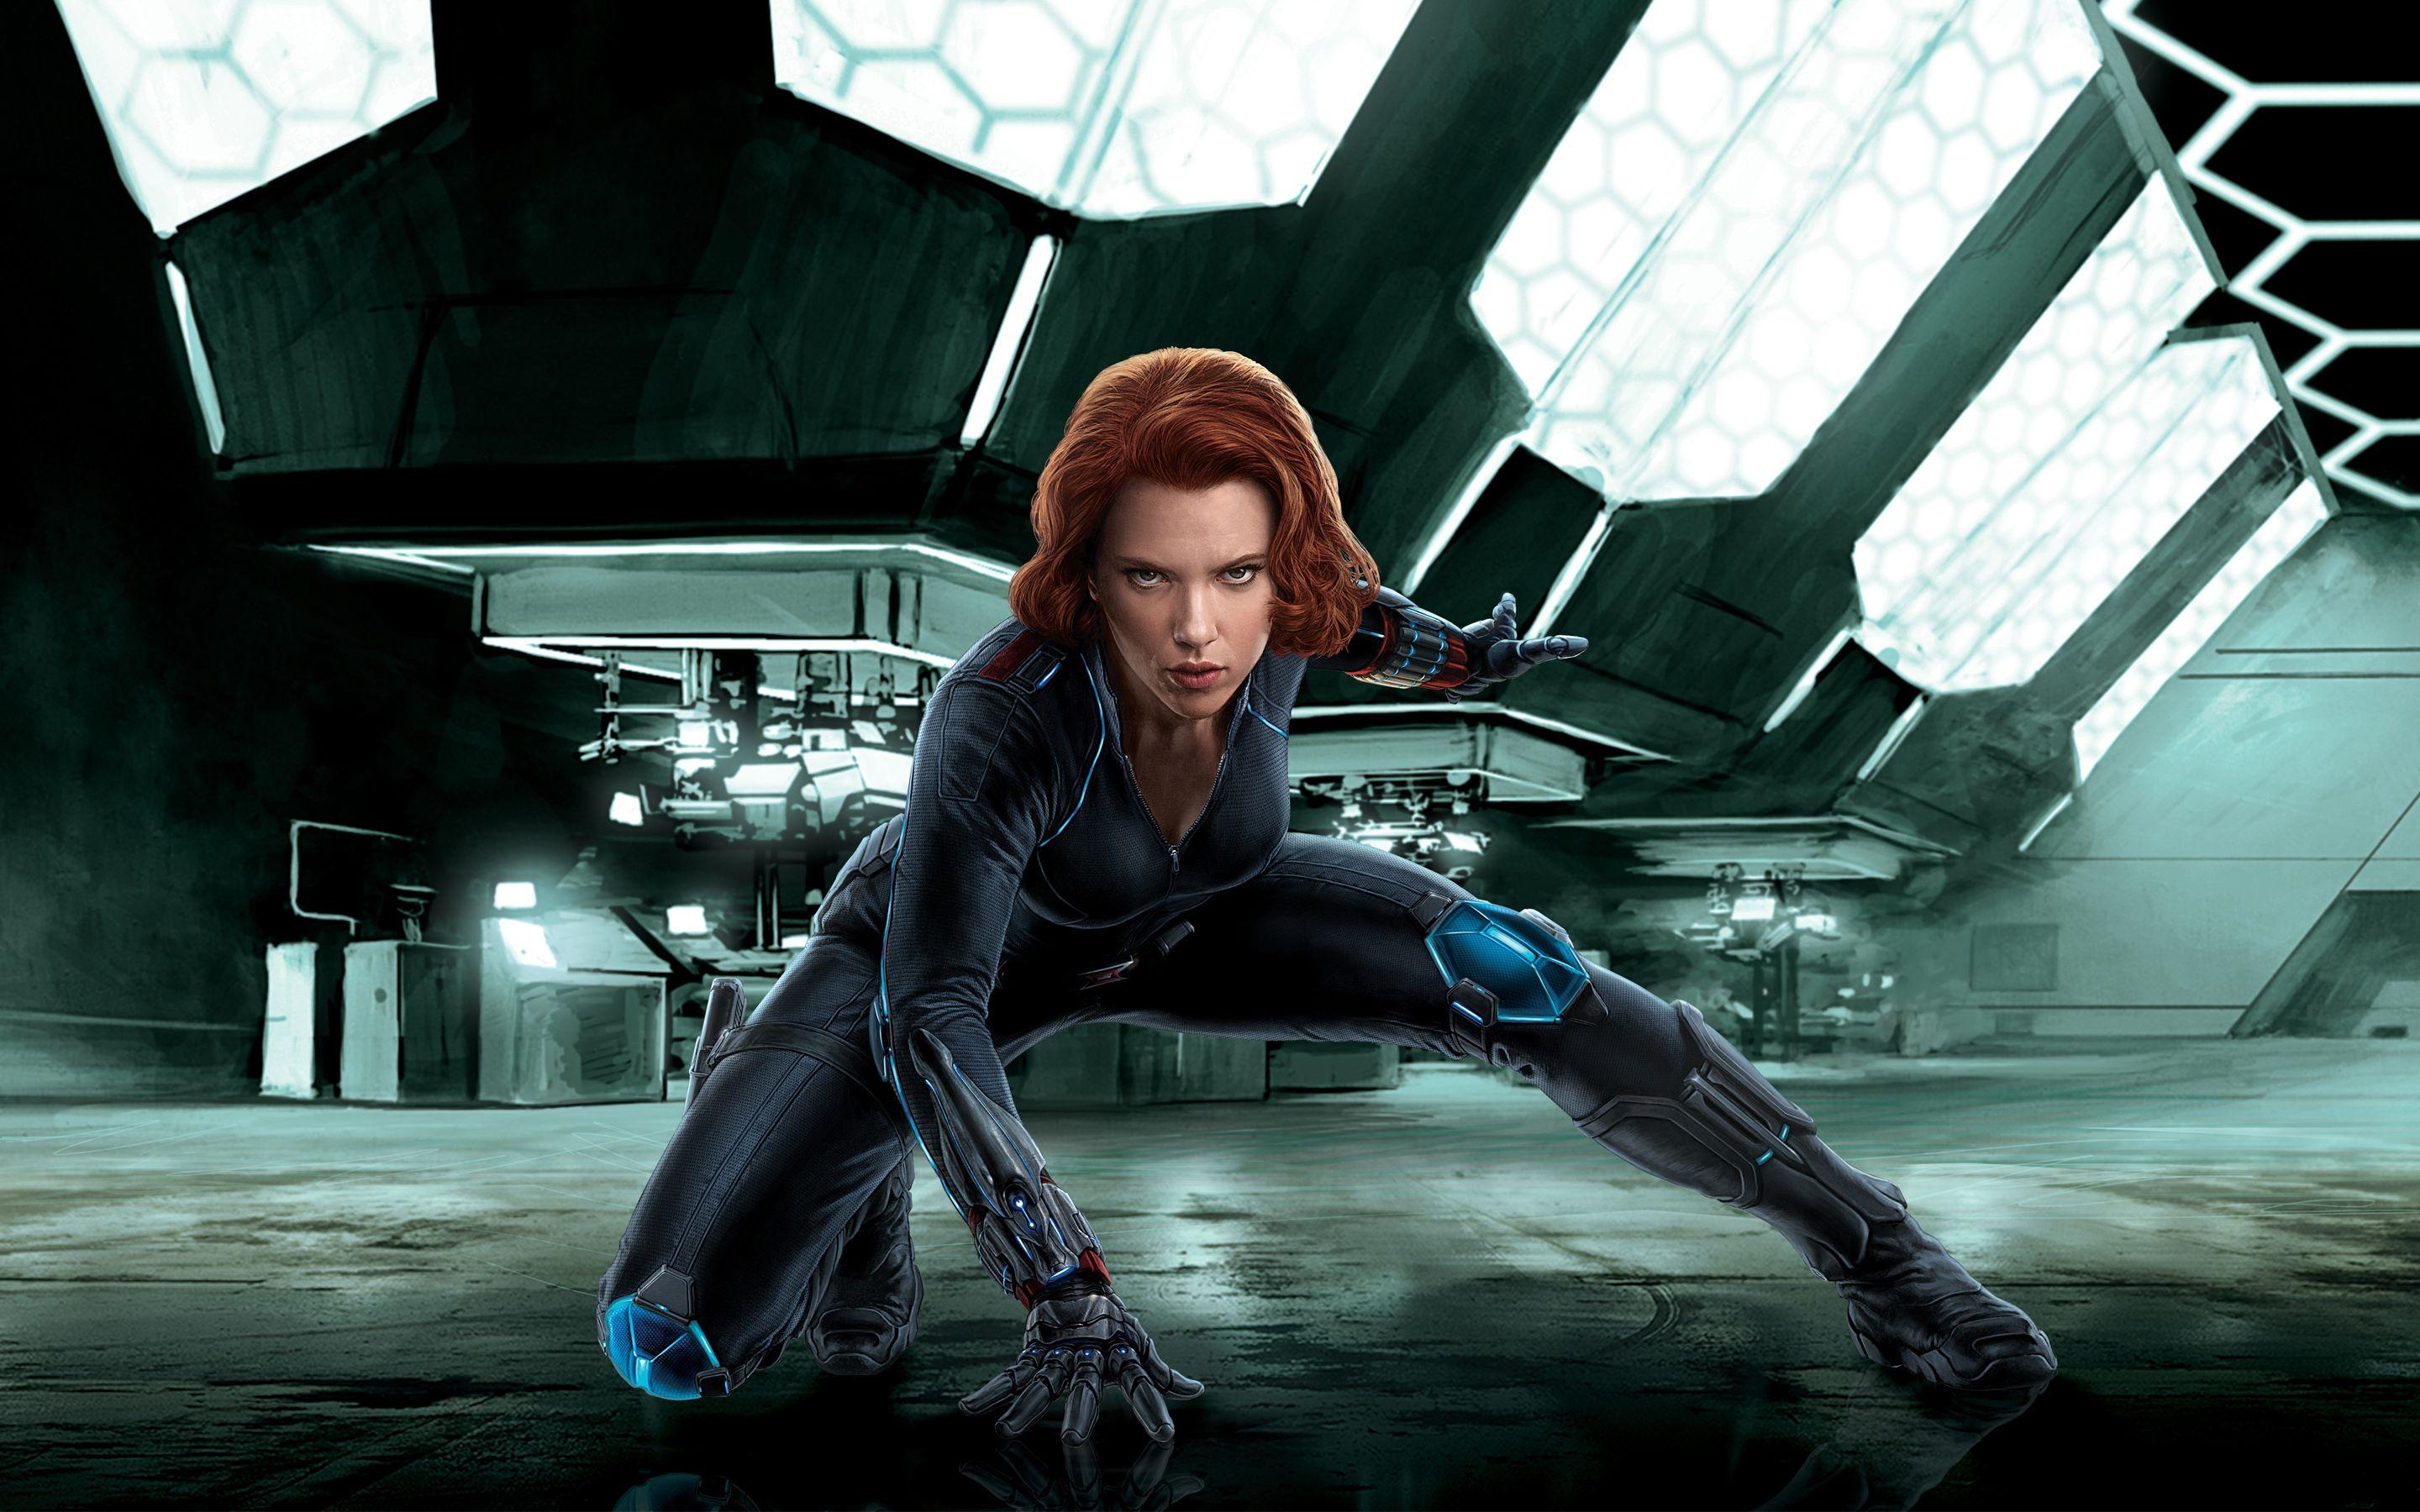 Featured image of post Black Widow Hd Wallpaper For Mobile / Black widow hd wallpaper posted in mixed wallpapers category and wallpaper original resolution is 1920x1080 px.